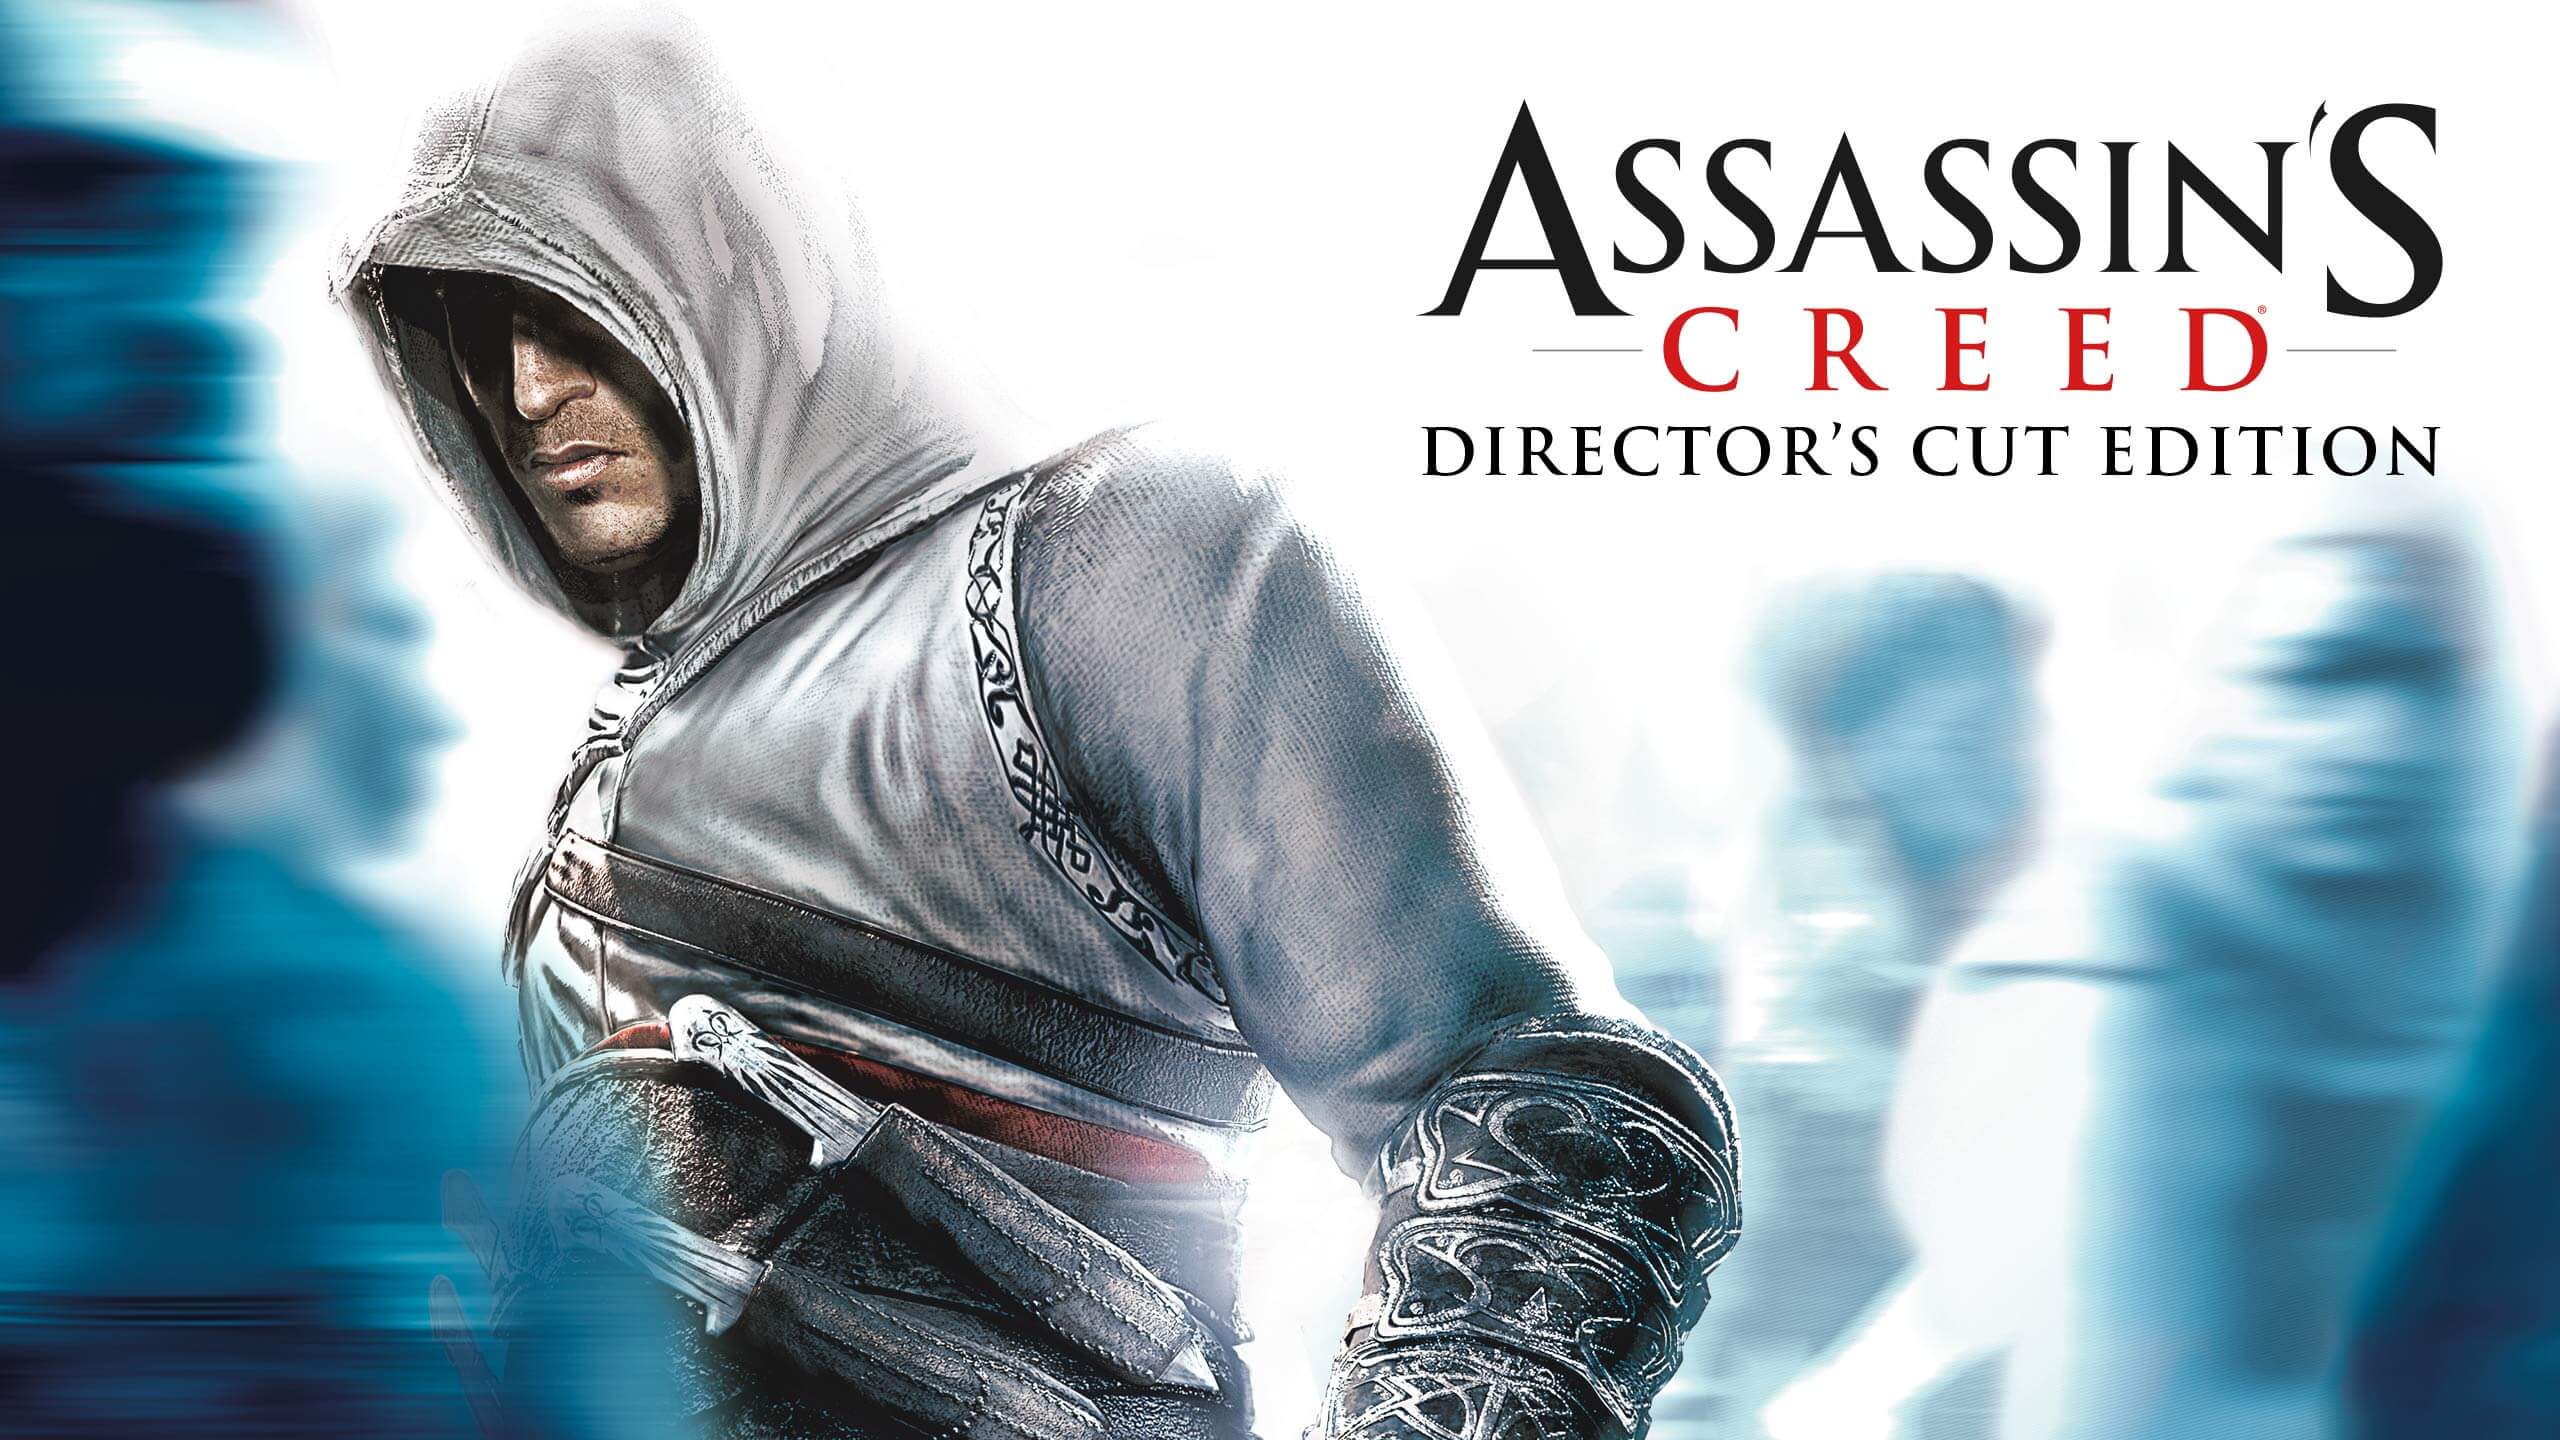 Assassin's Creed 1 Altair Stealth Assassinations & Brutal Combat